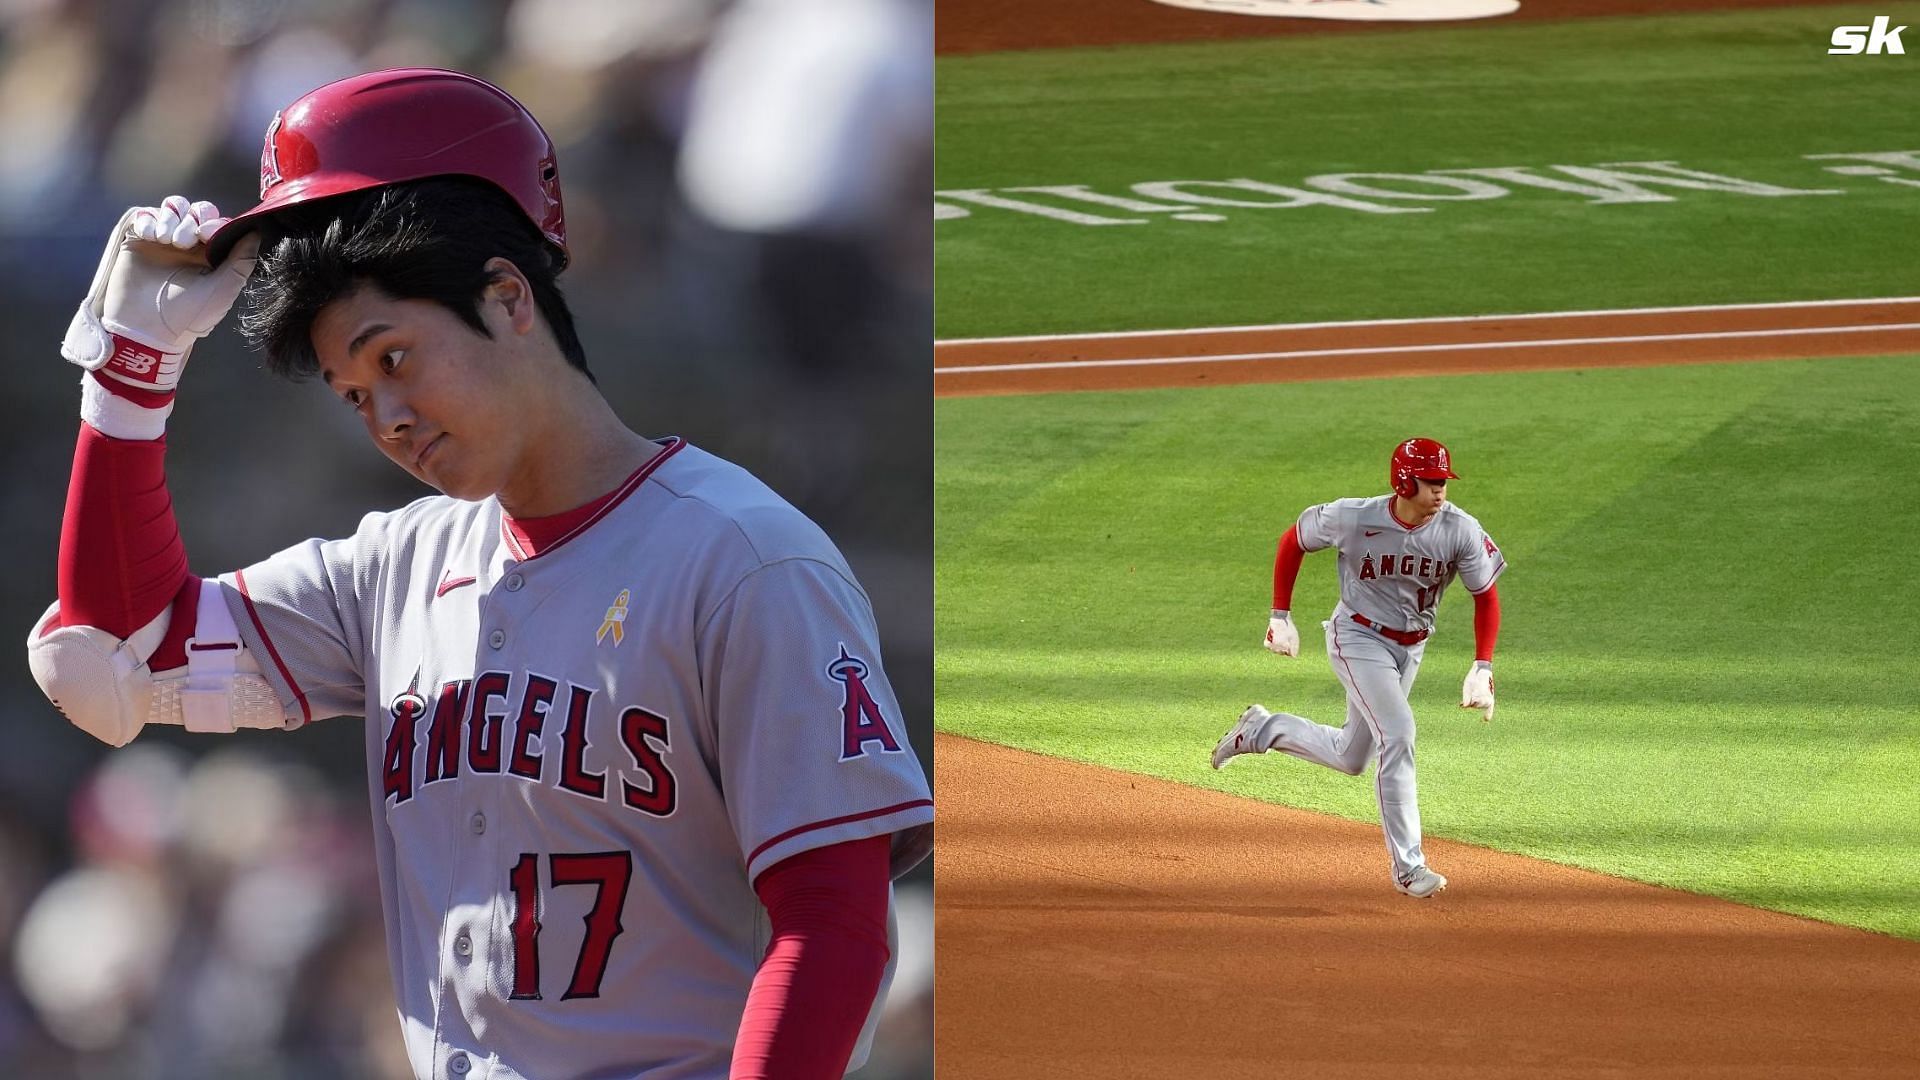 WATCH Angels two-way superstar Shohei Ohtani makes history with 20th SB this season